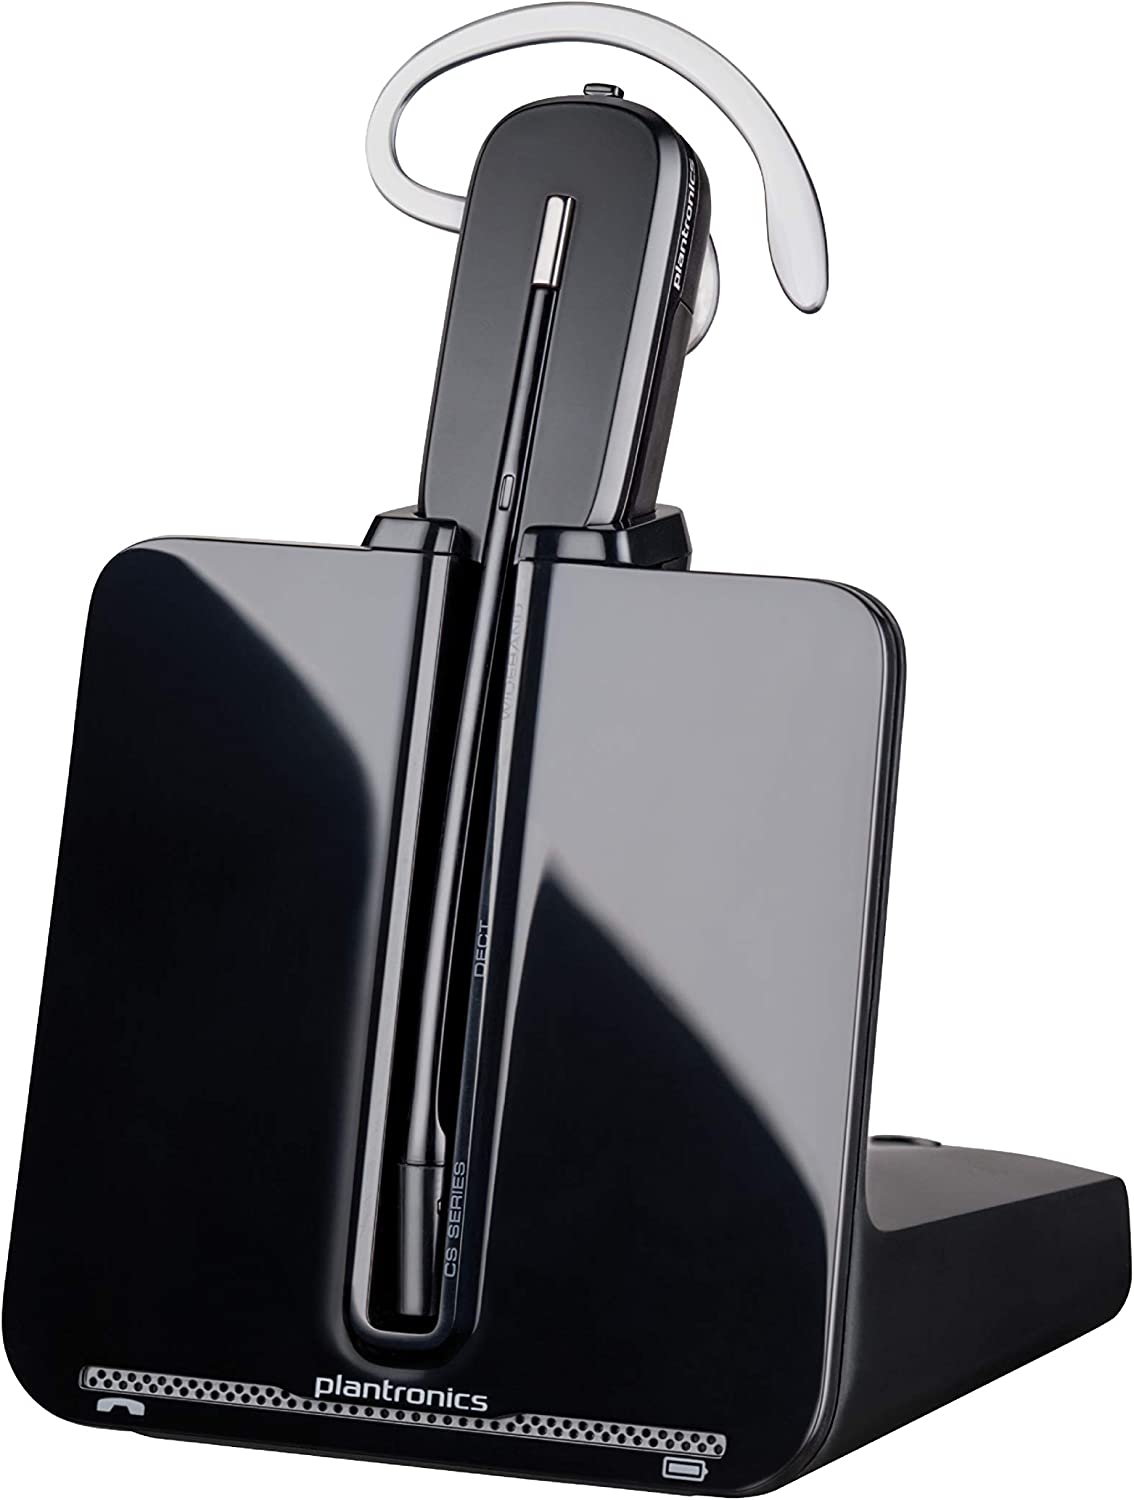 Plantronics - CS540 Wireless DECT Headset (Poly) - Single Ear (Mono) Convertible (3 wearing styles) - Connects to Desk Phone - Noise Canceling Microphone Headset Without Lifter